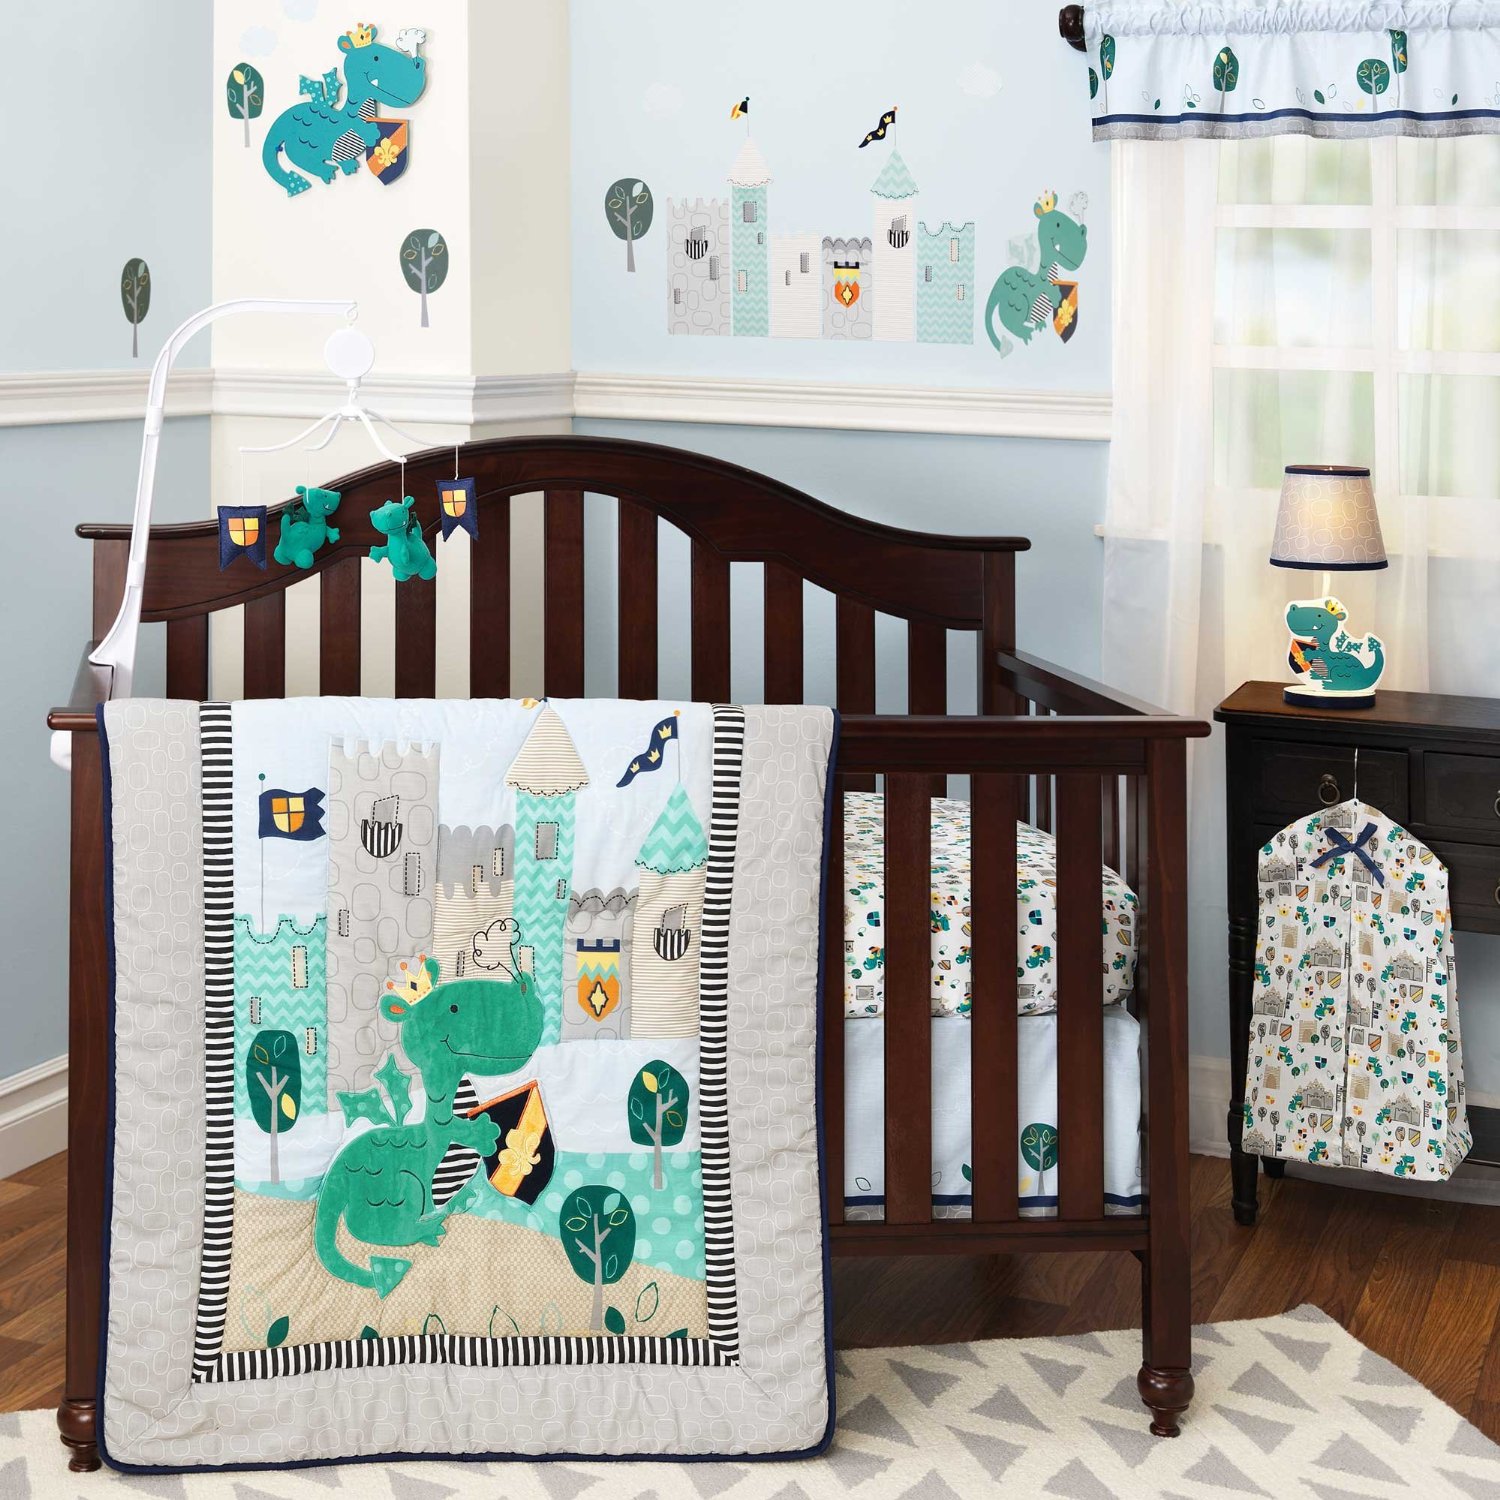 Bedtime Originals Sparky Crib Bedding and Accessories - Baby 